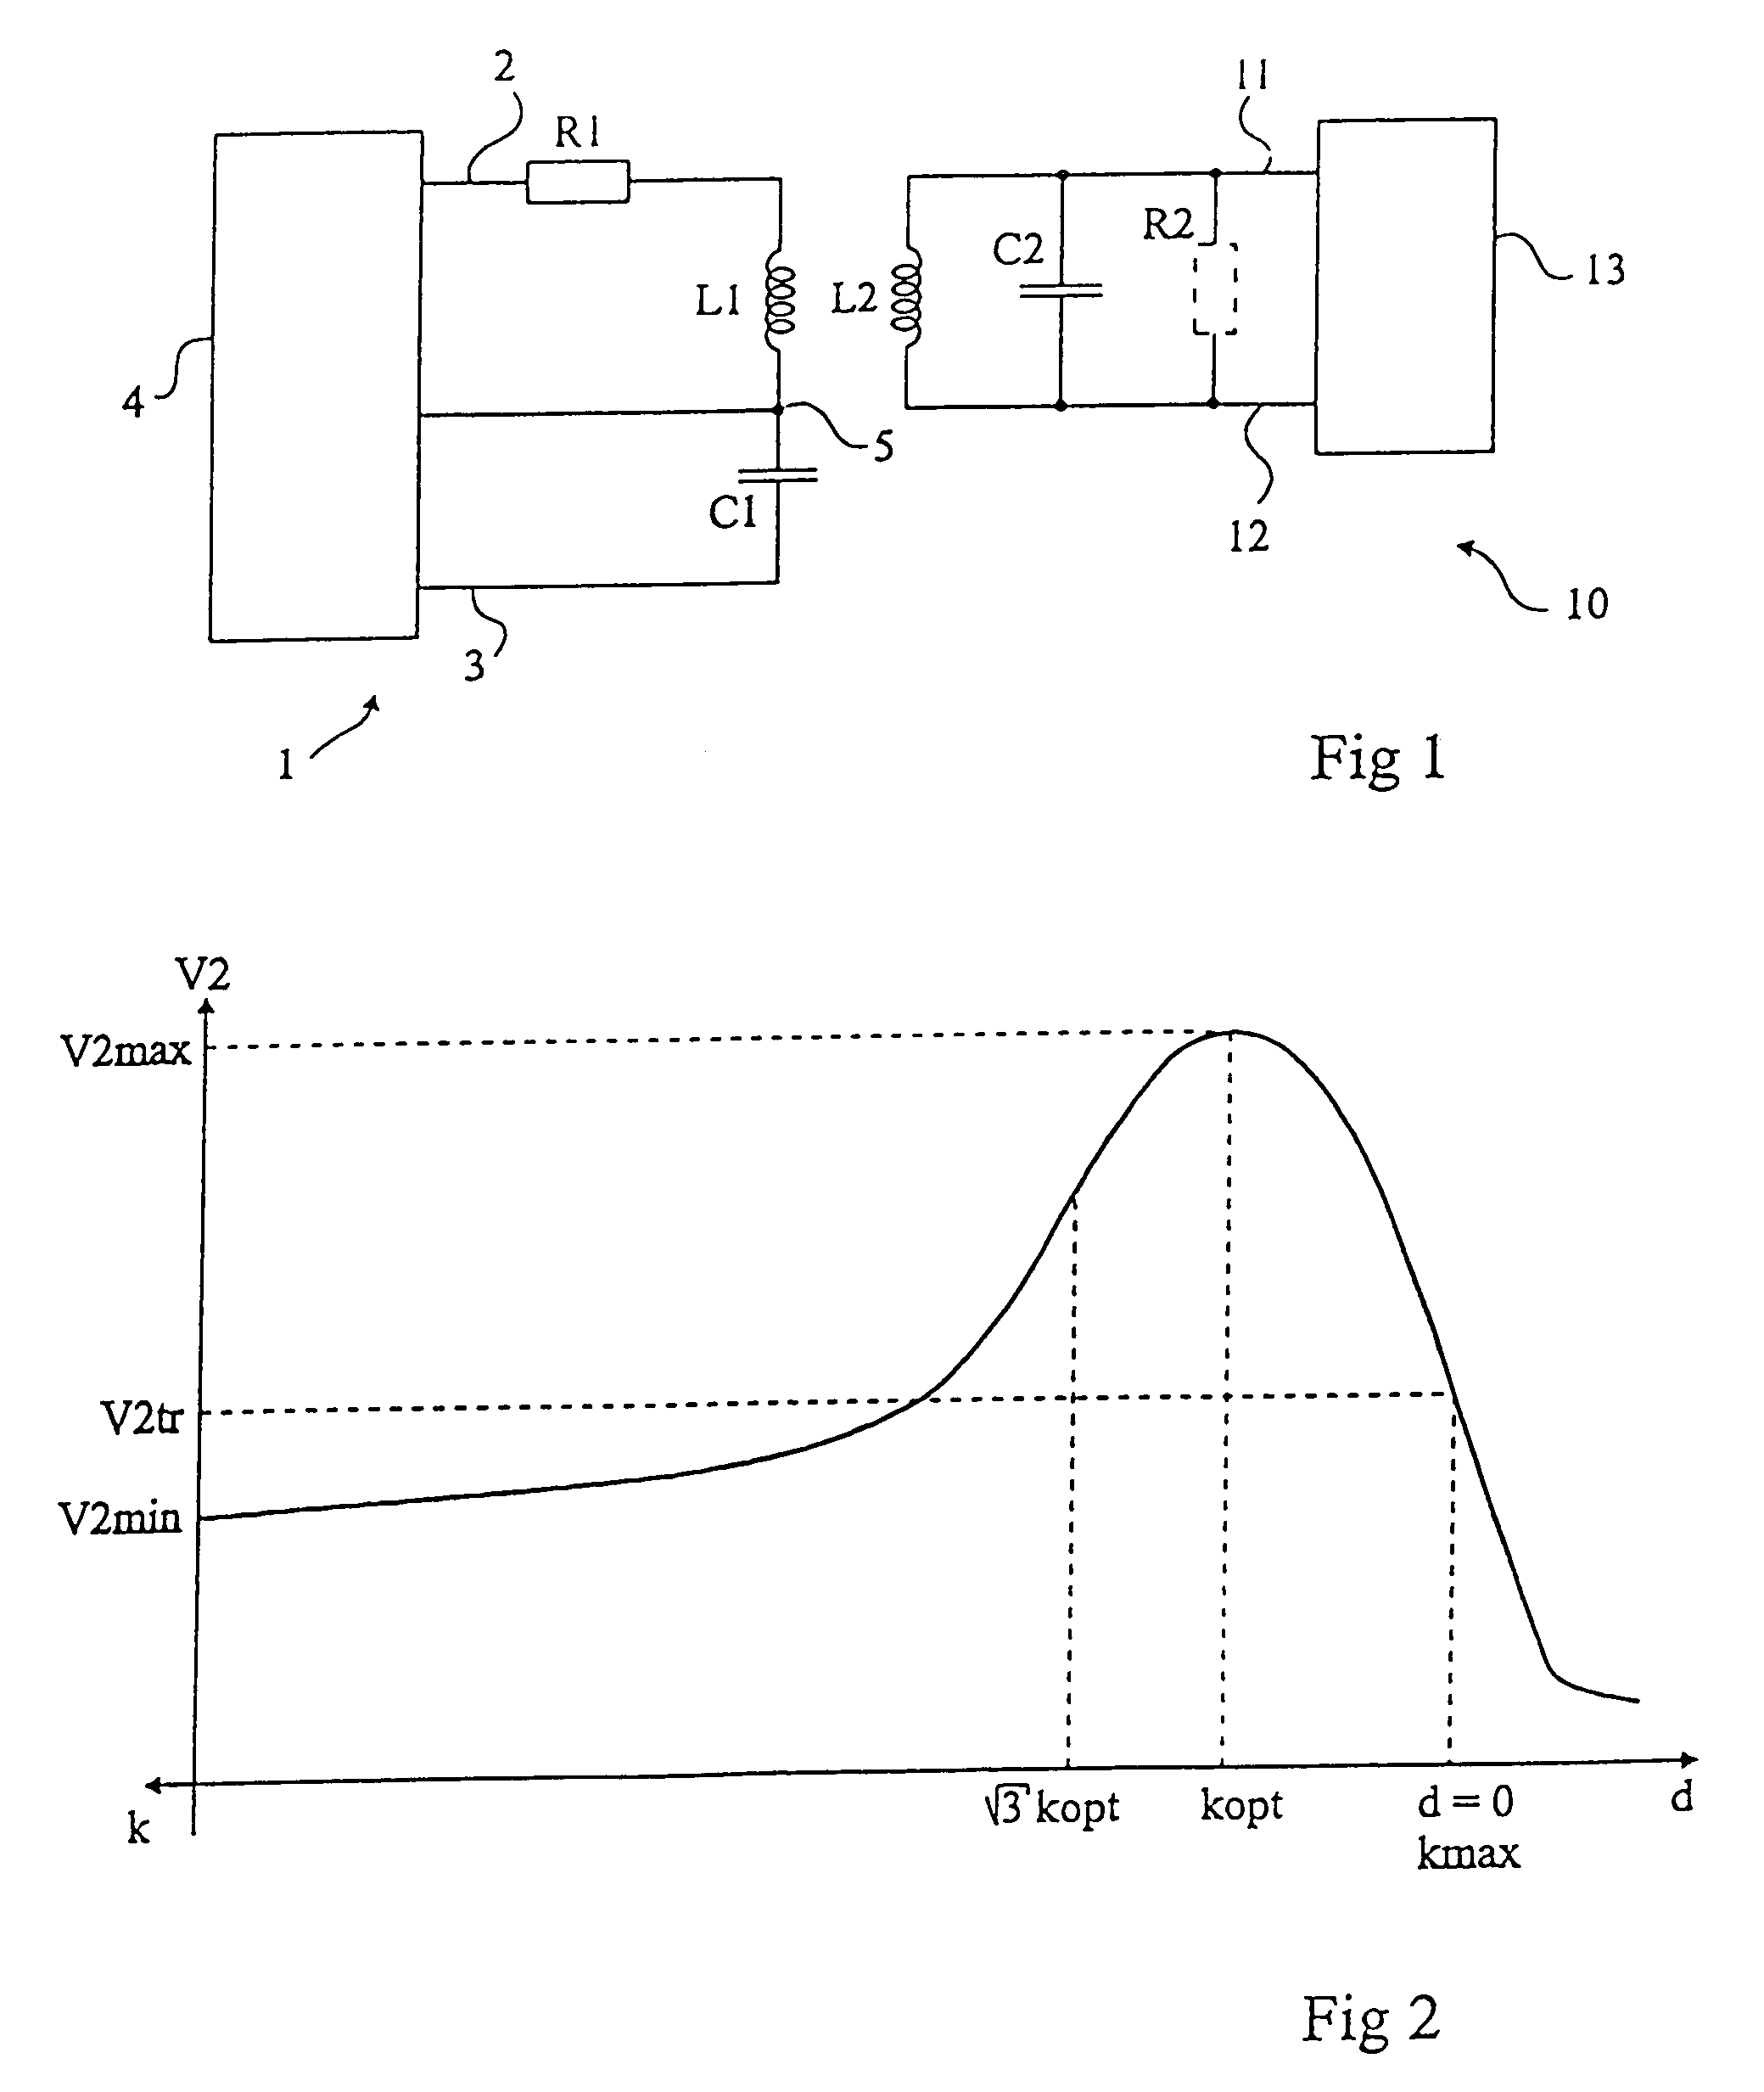 Sizing of an electromagnetic transponder system for an operation in extreme proximity